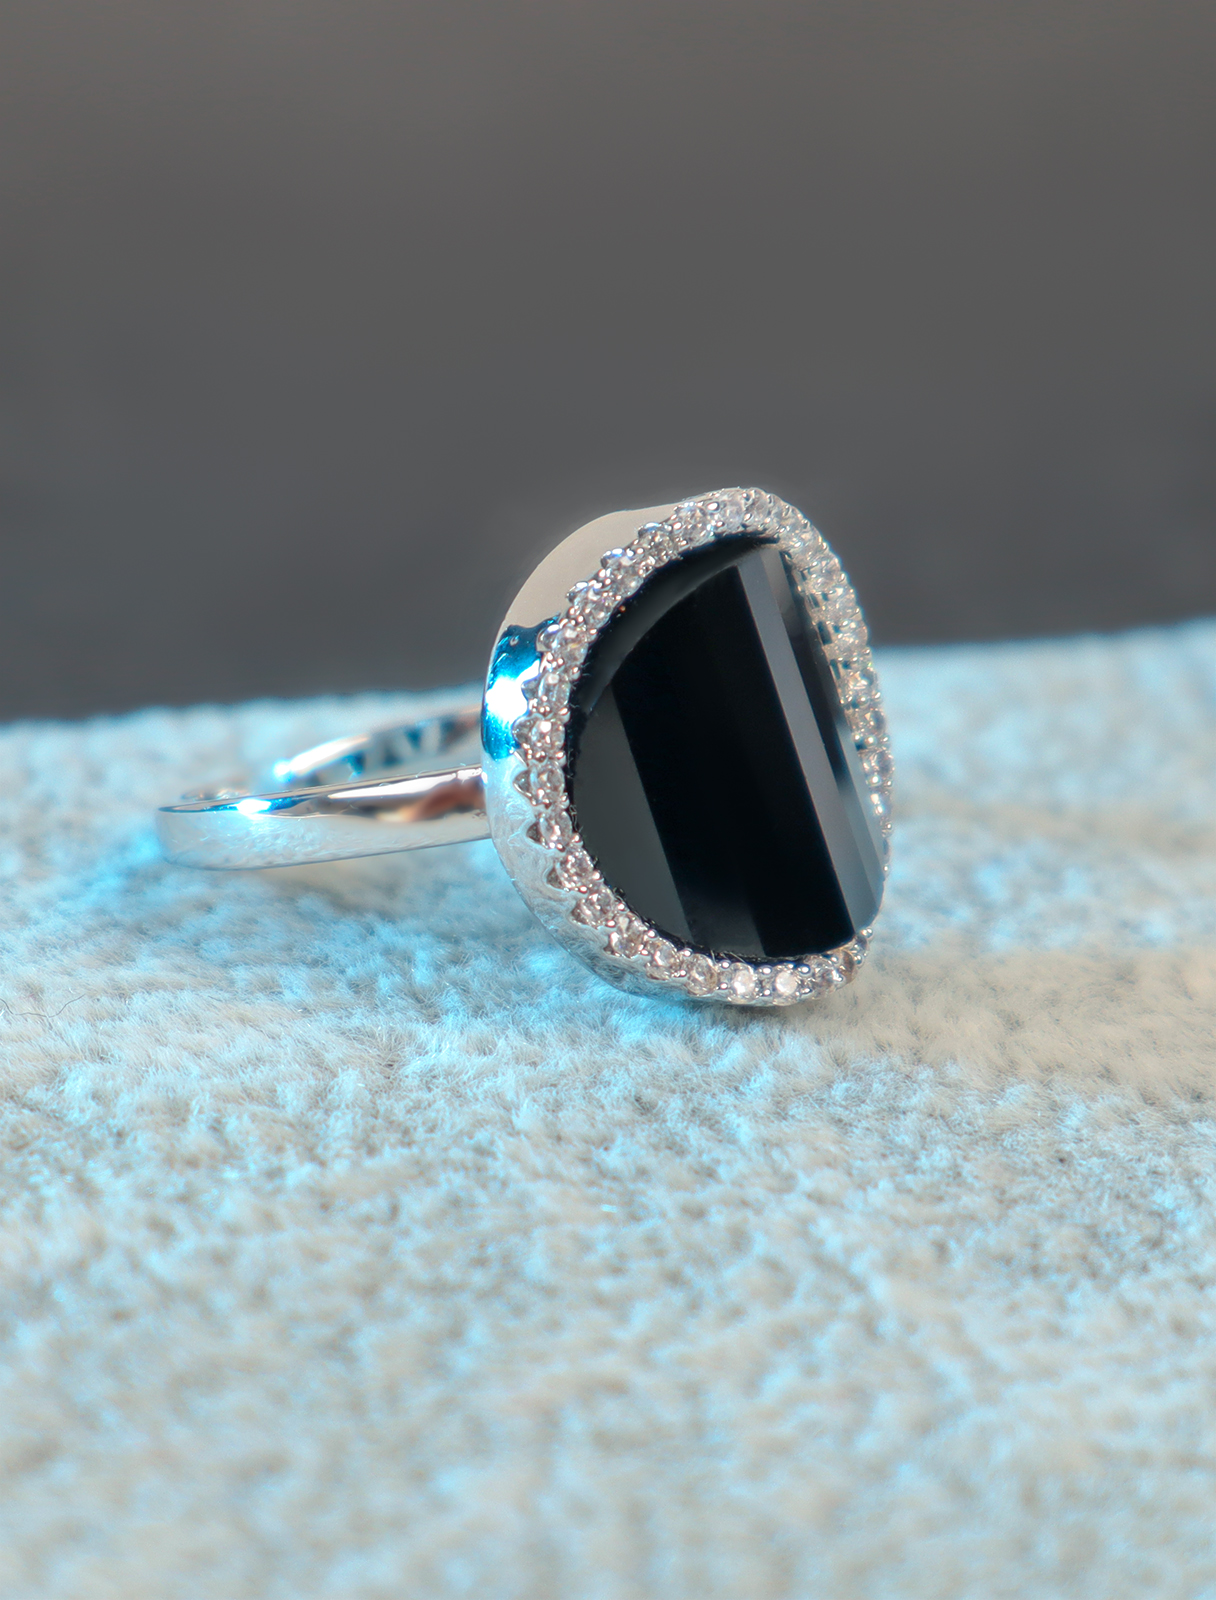 A modern ring with a black stone decorated with crystals